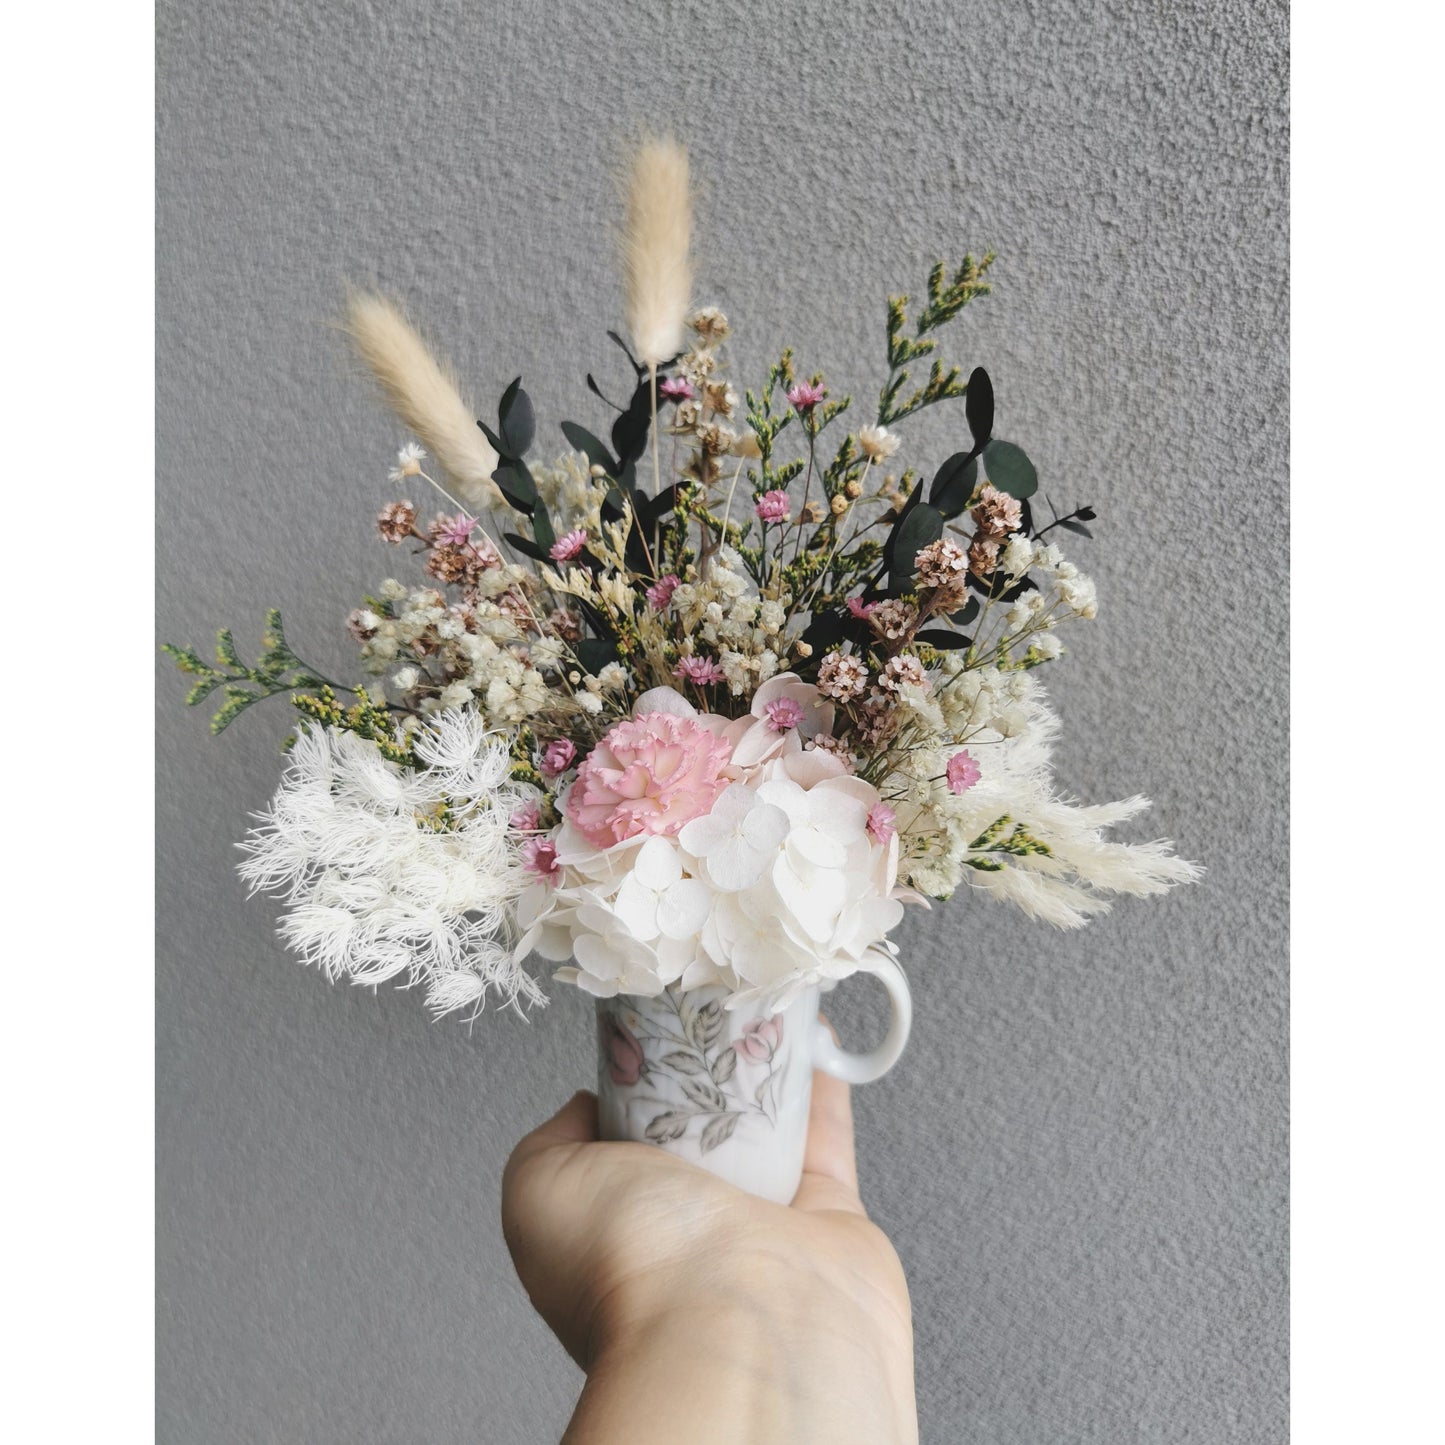 Mini Dried & Preserved flower arrangement with green, pink & white flowers in a mini geisha bone China Japan vase with handle. Photo shows arrangement being held by hand against a blank wall